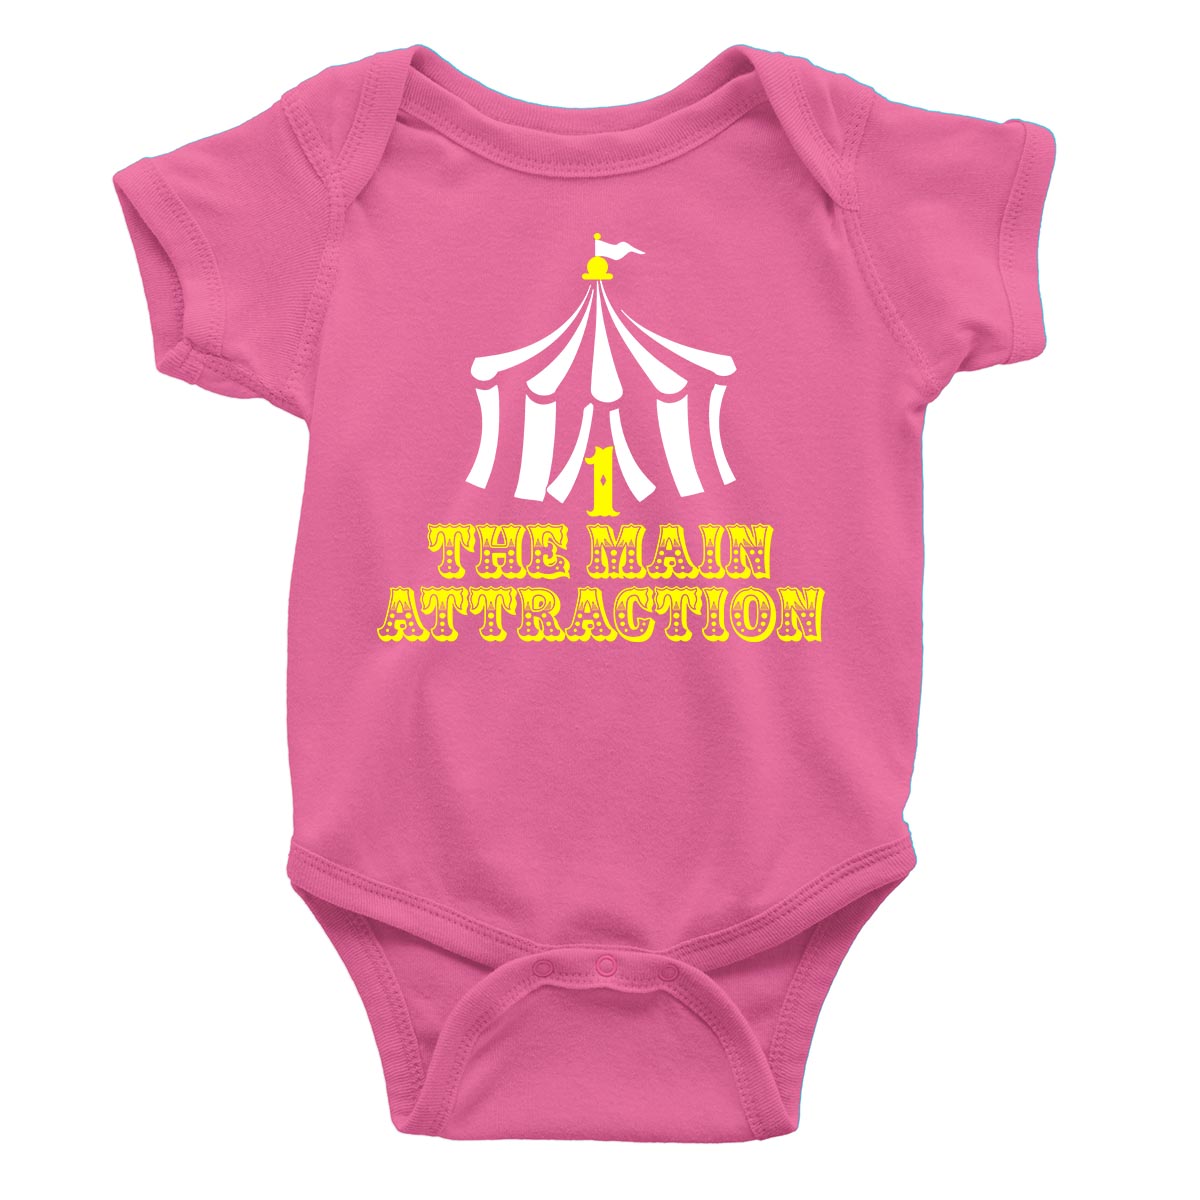 circus theme the main attraction one romper pink